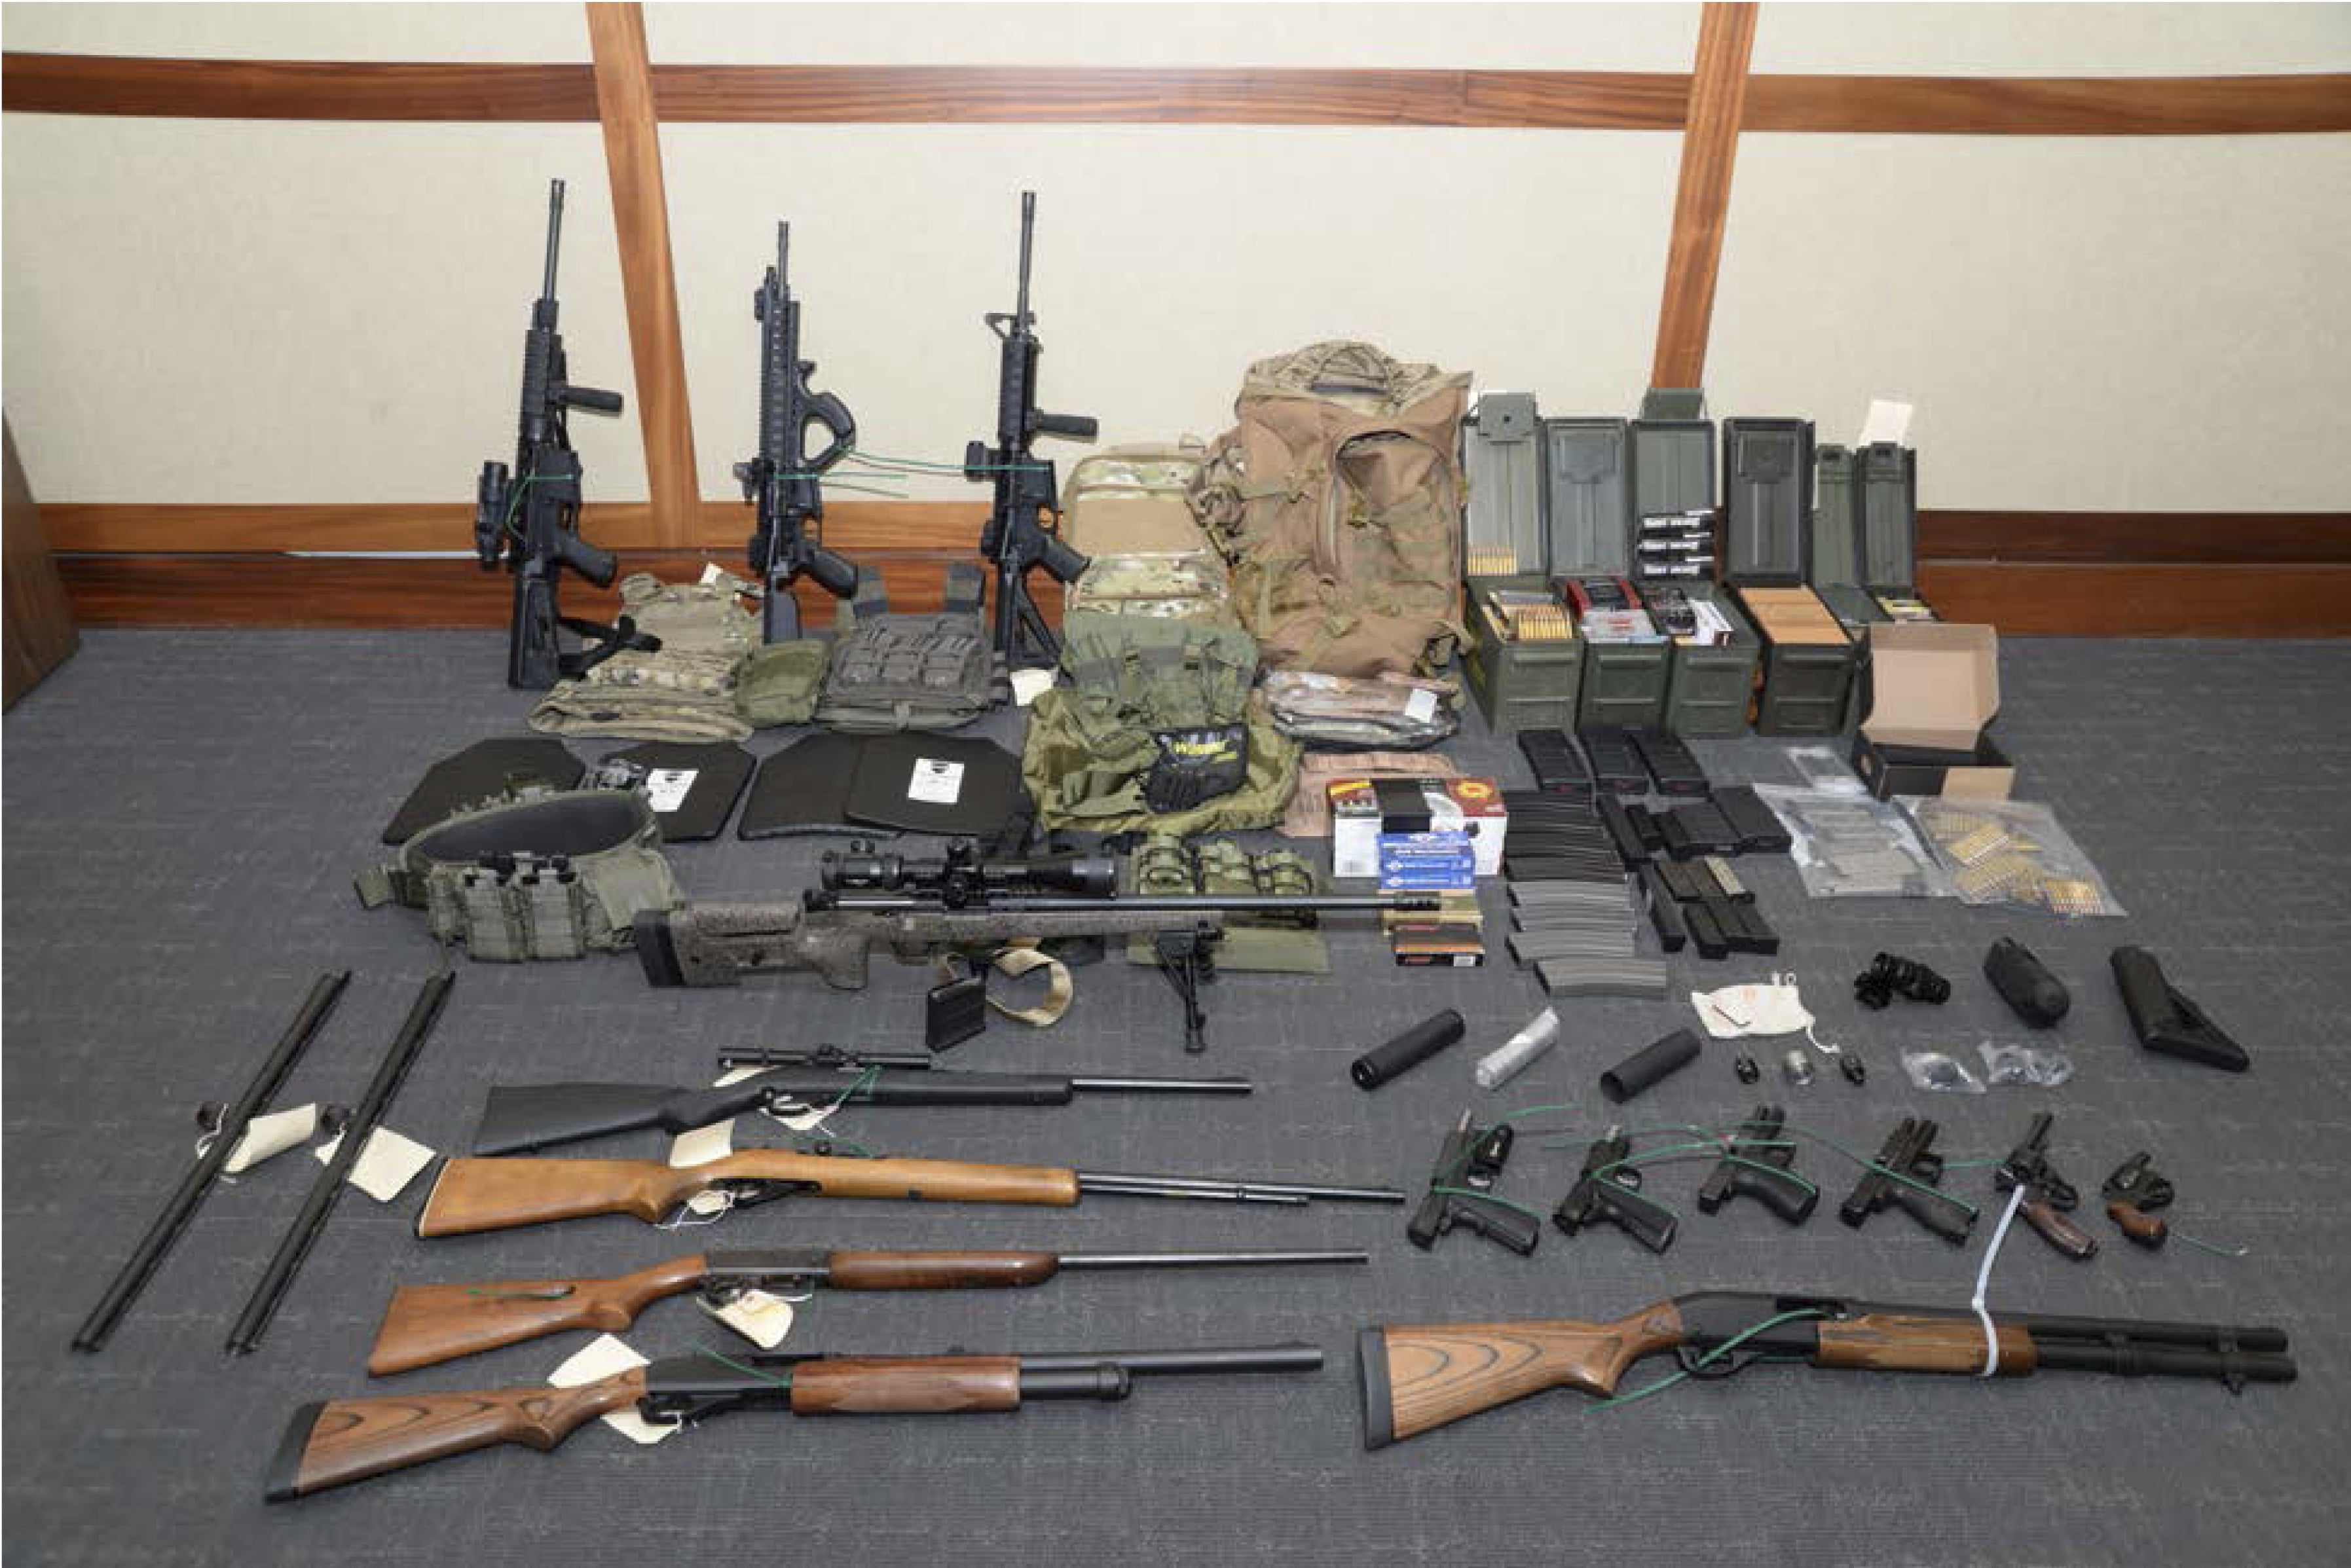 This image provided by the U.S. District Court in Maryland shows a photo of firearms and ammunition that was in the motion for detention pending trial in the case against Christopher Paul Hasson. Prosecutors say that Hasson, a Coast Guard lieutenant is a "domestic terrorist" who wrote about biological attacks and had a hit list that included prominent Democrats and media figures. He is due in court on Feb. 21 in Maryland. Prosecutors say Hasson espoused extremist views for years. Court papers say Hasson described an "interesting idea" in a 2017 draft email that included "biological attacks followed by attack on food supply." (U.S.